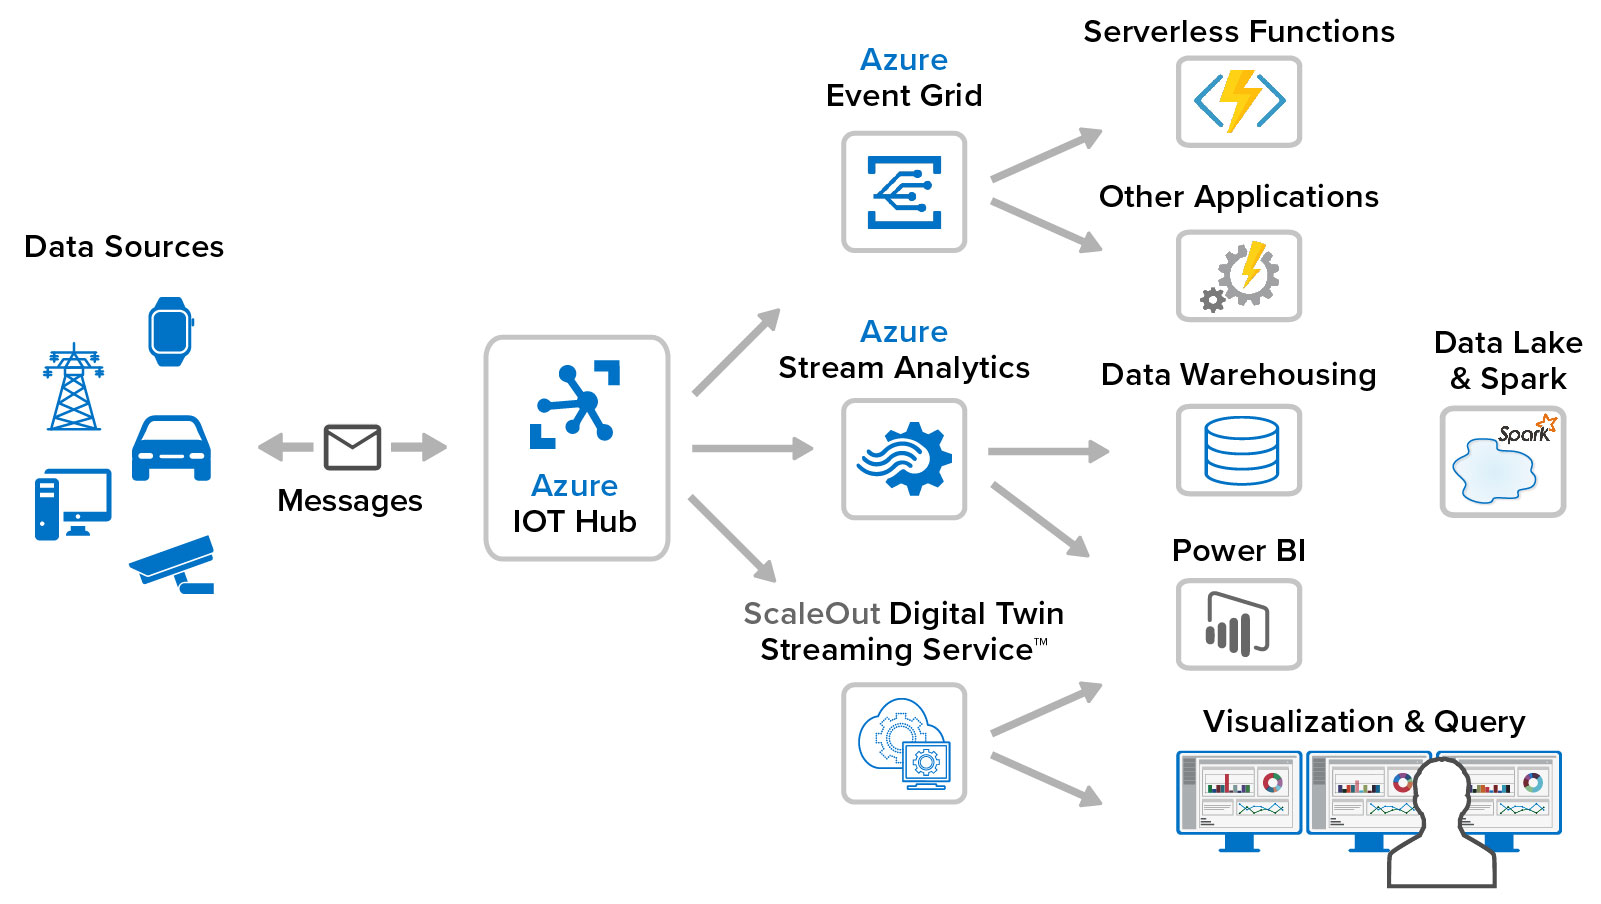 ScaleOut Digital Twin Streaming Service in the Azure IoT ecosystem